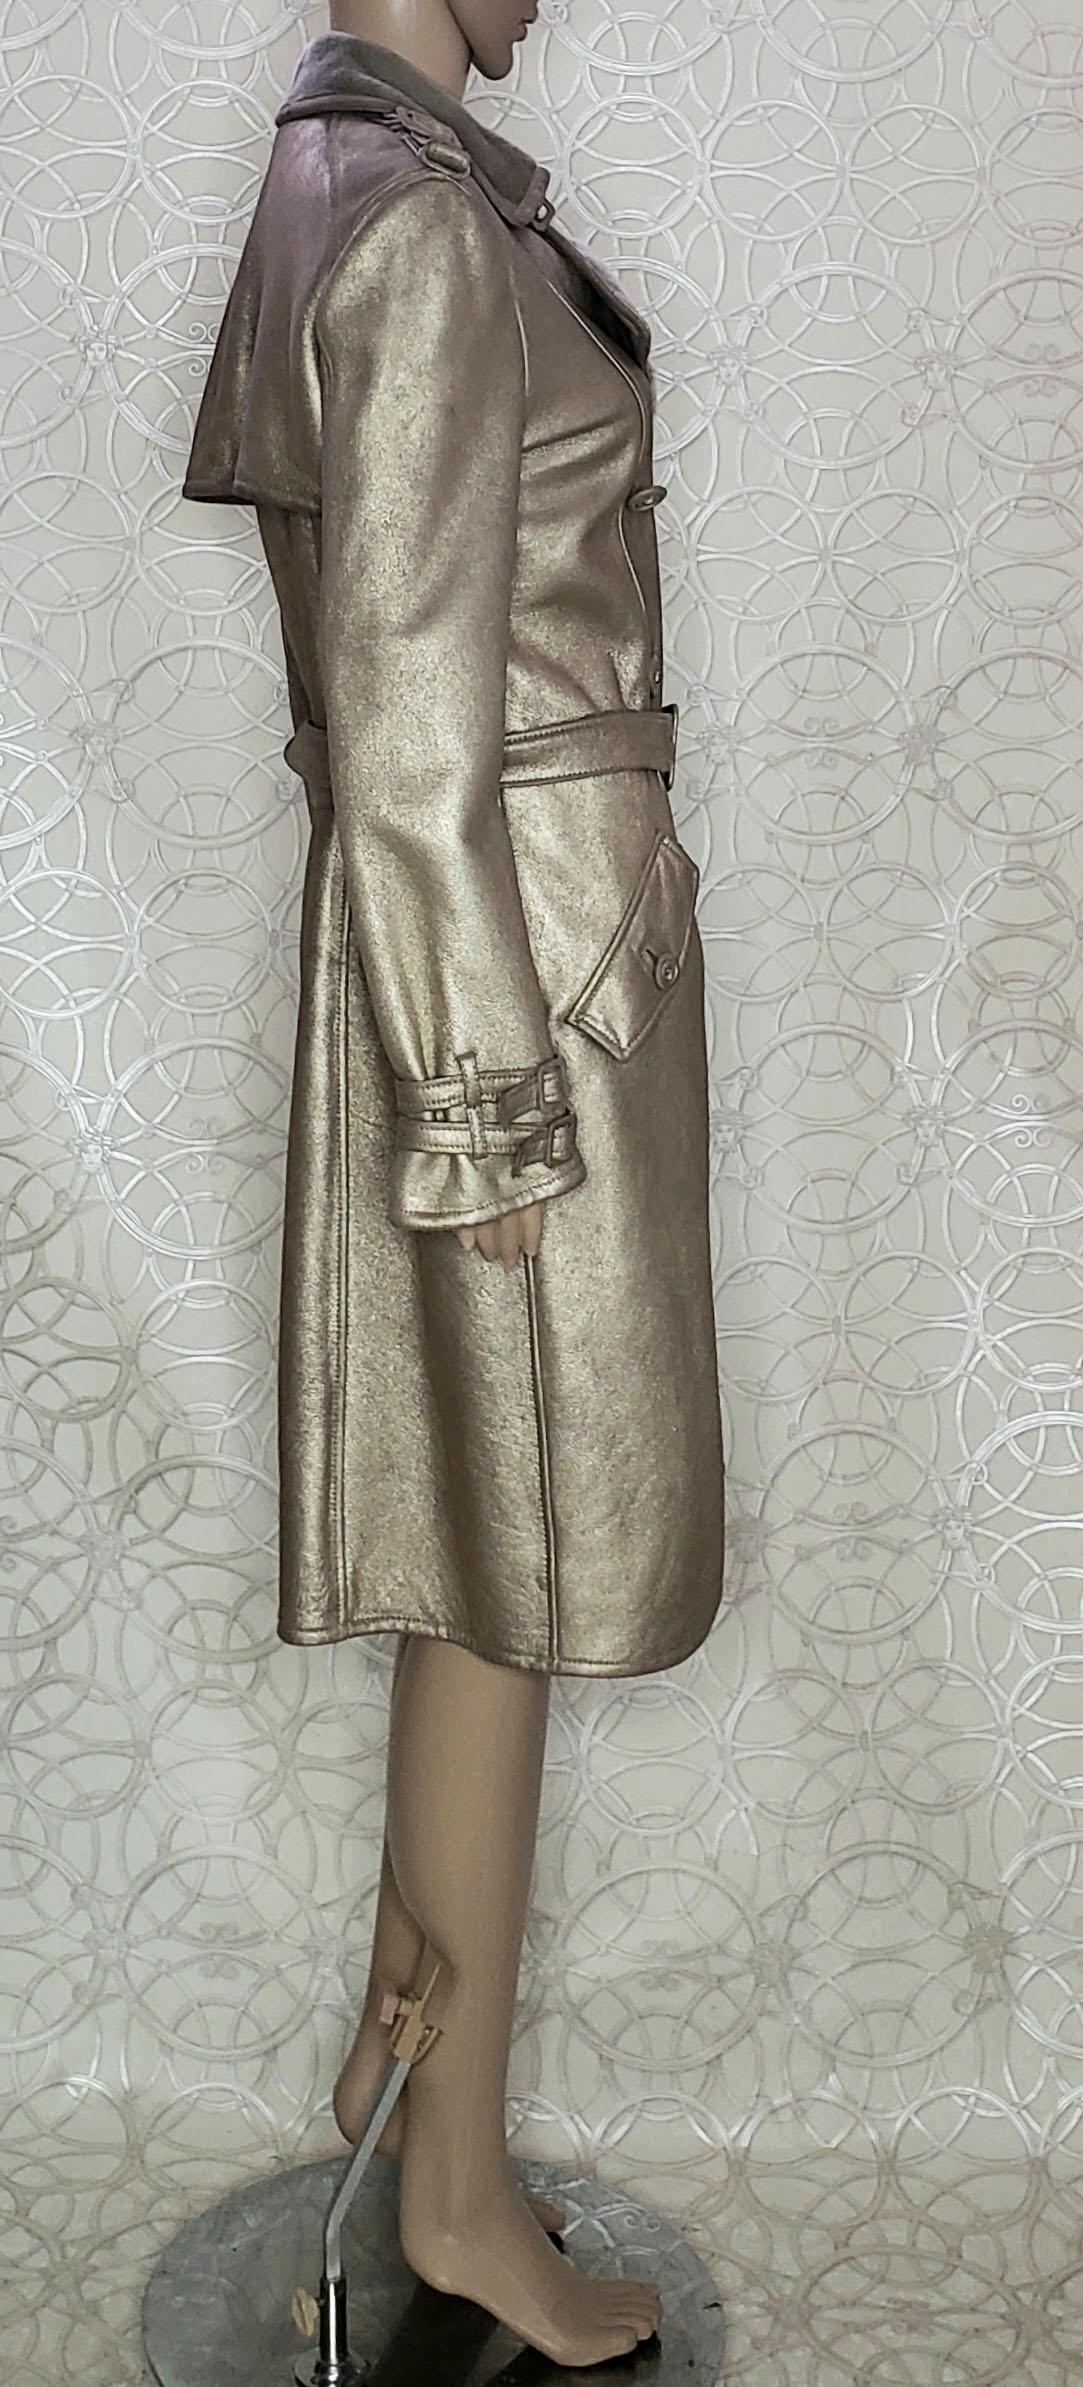 VERSACE SHEARLING FUR LEATHER TRENCH COAT mit DISTRESsed GOLD FINISH IT 42 - 6 im Zustand „Neu“ im Angebot in Montgomery, TX